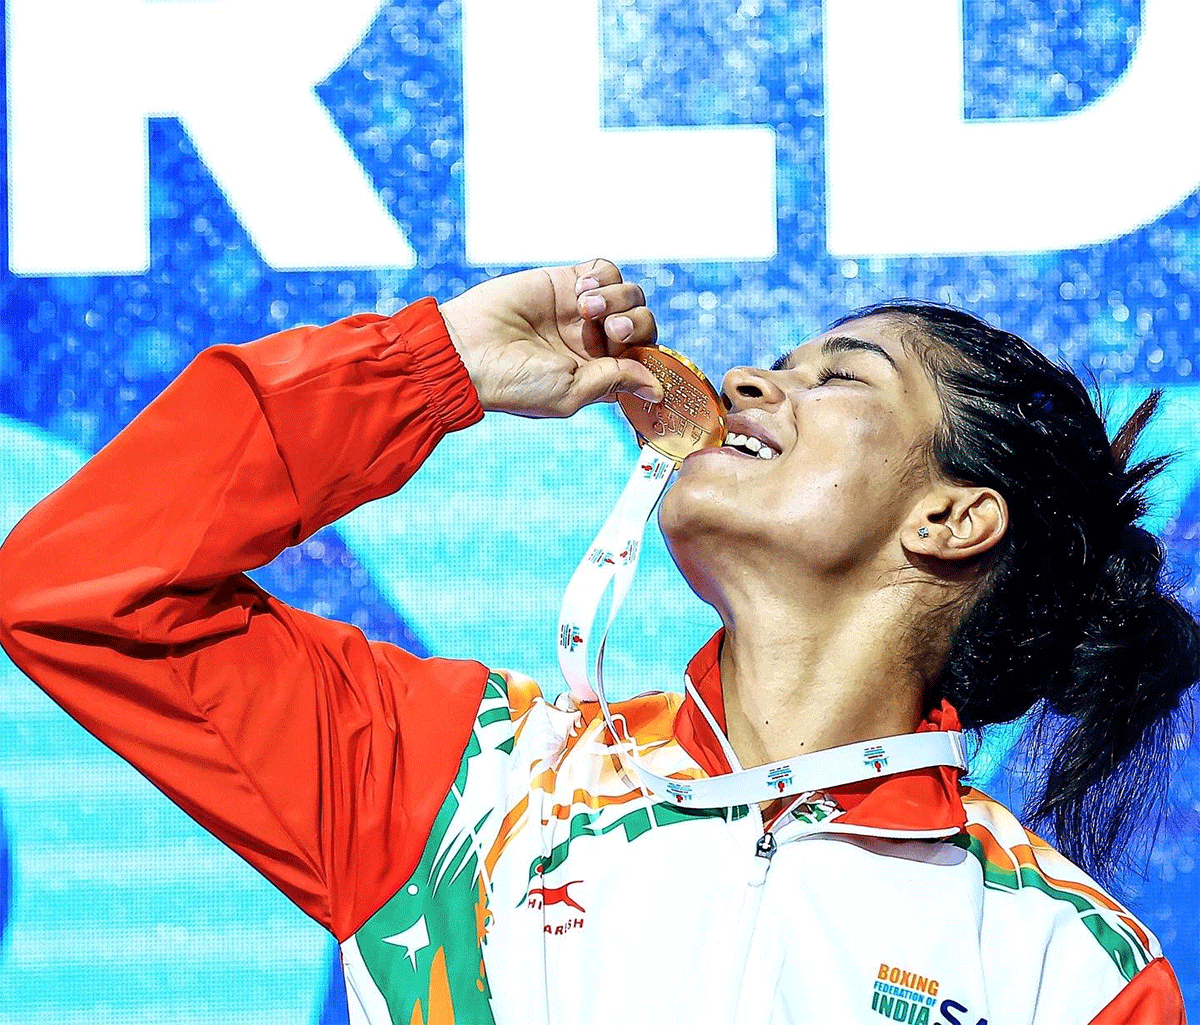 Nikhat Zareen kisses her medal on the podium after winning the Women's Boxing World Championship title in the flyweight category on Friday 